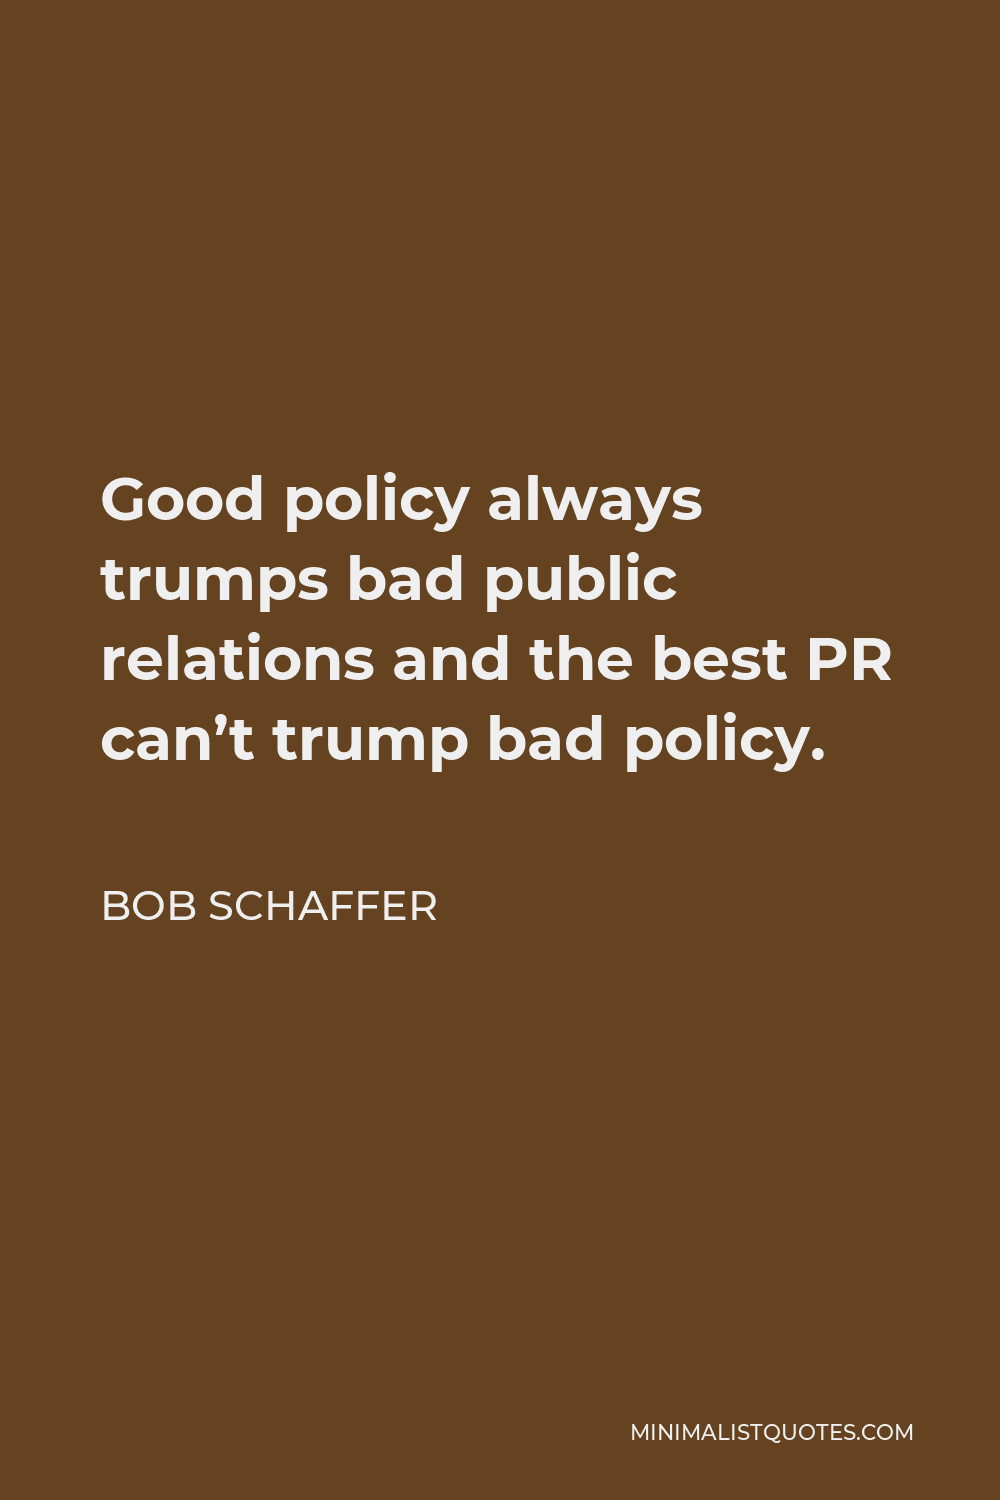 Bob Schaffer Quote - Good policy always trumps bad public relations and the best PR can’t trump bad policy.